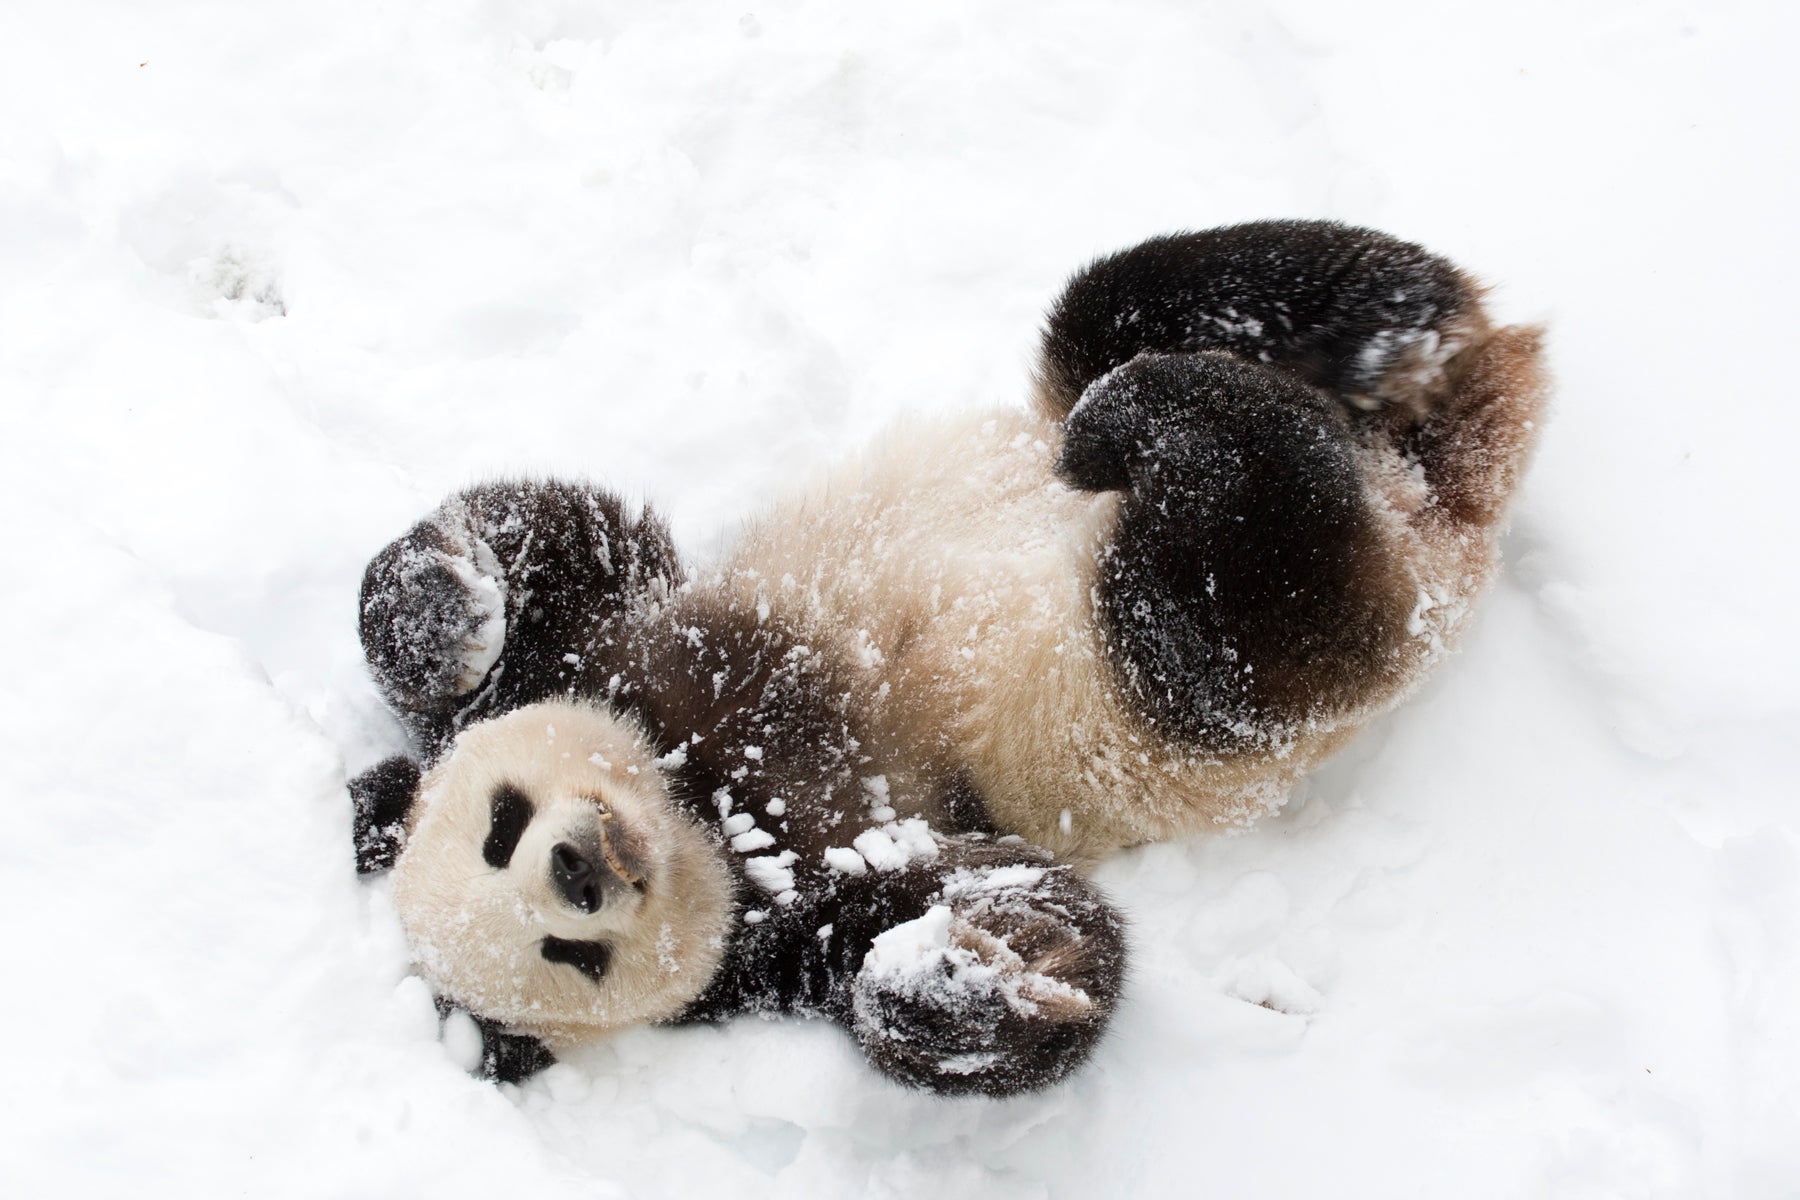 Your Go-to Guide for a Winter Day at the Zoo | Smithsonian's National Zoo